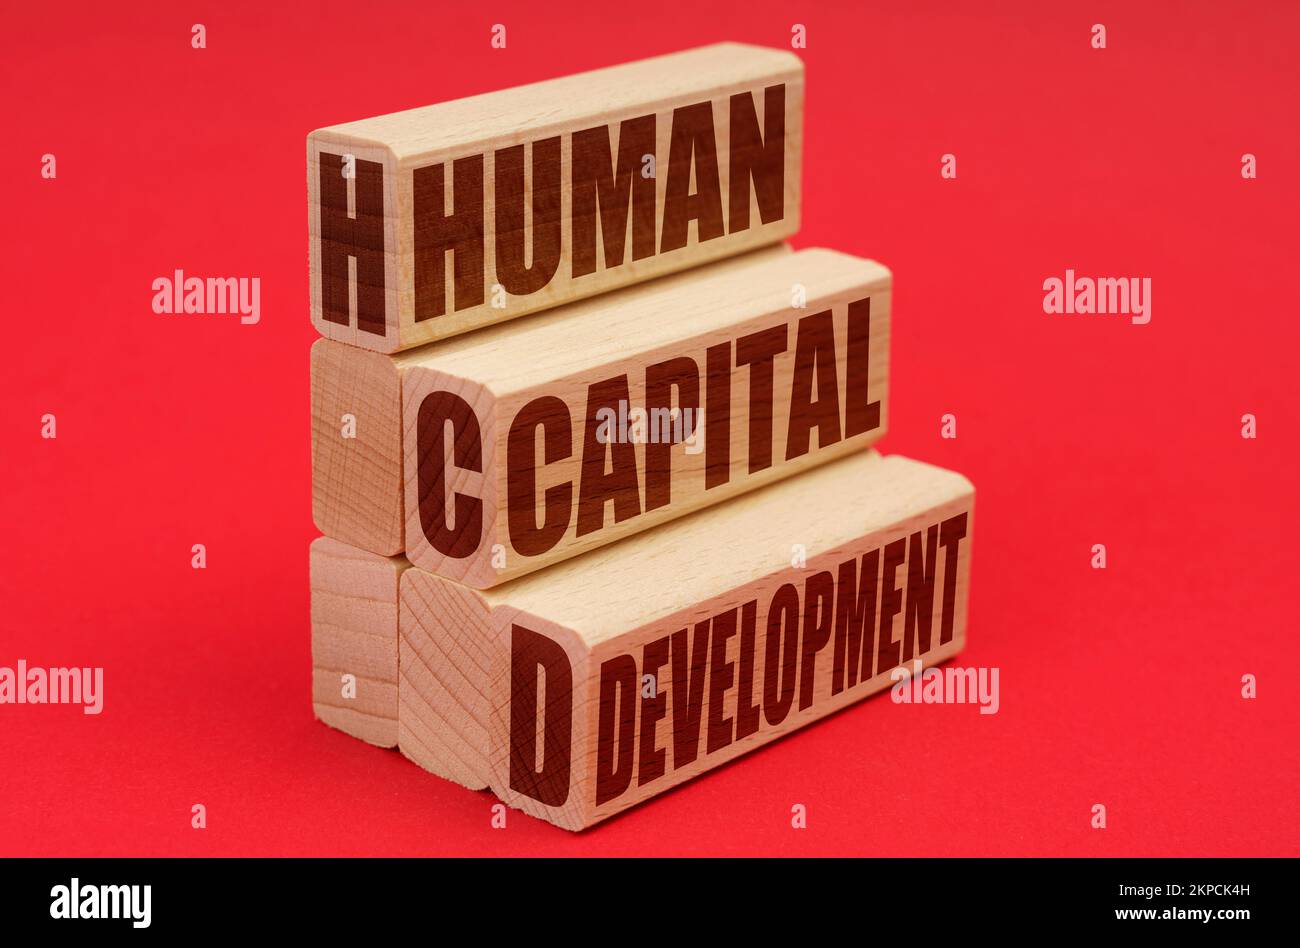 Business and economy concept. On a red background, wooden blocks with the inscription - Human Capital Development Stock Photo